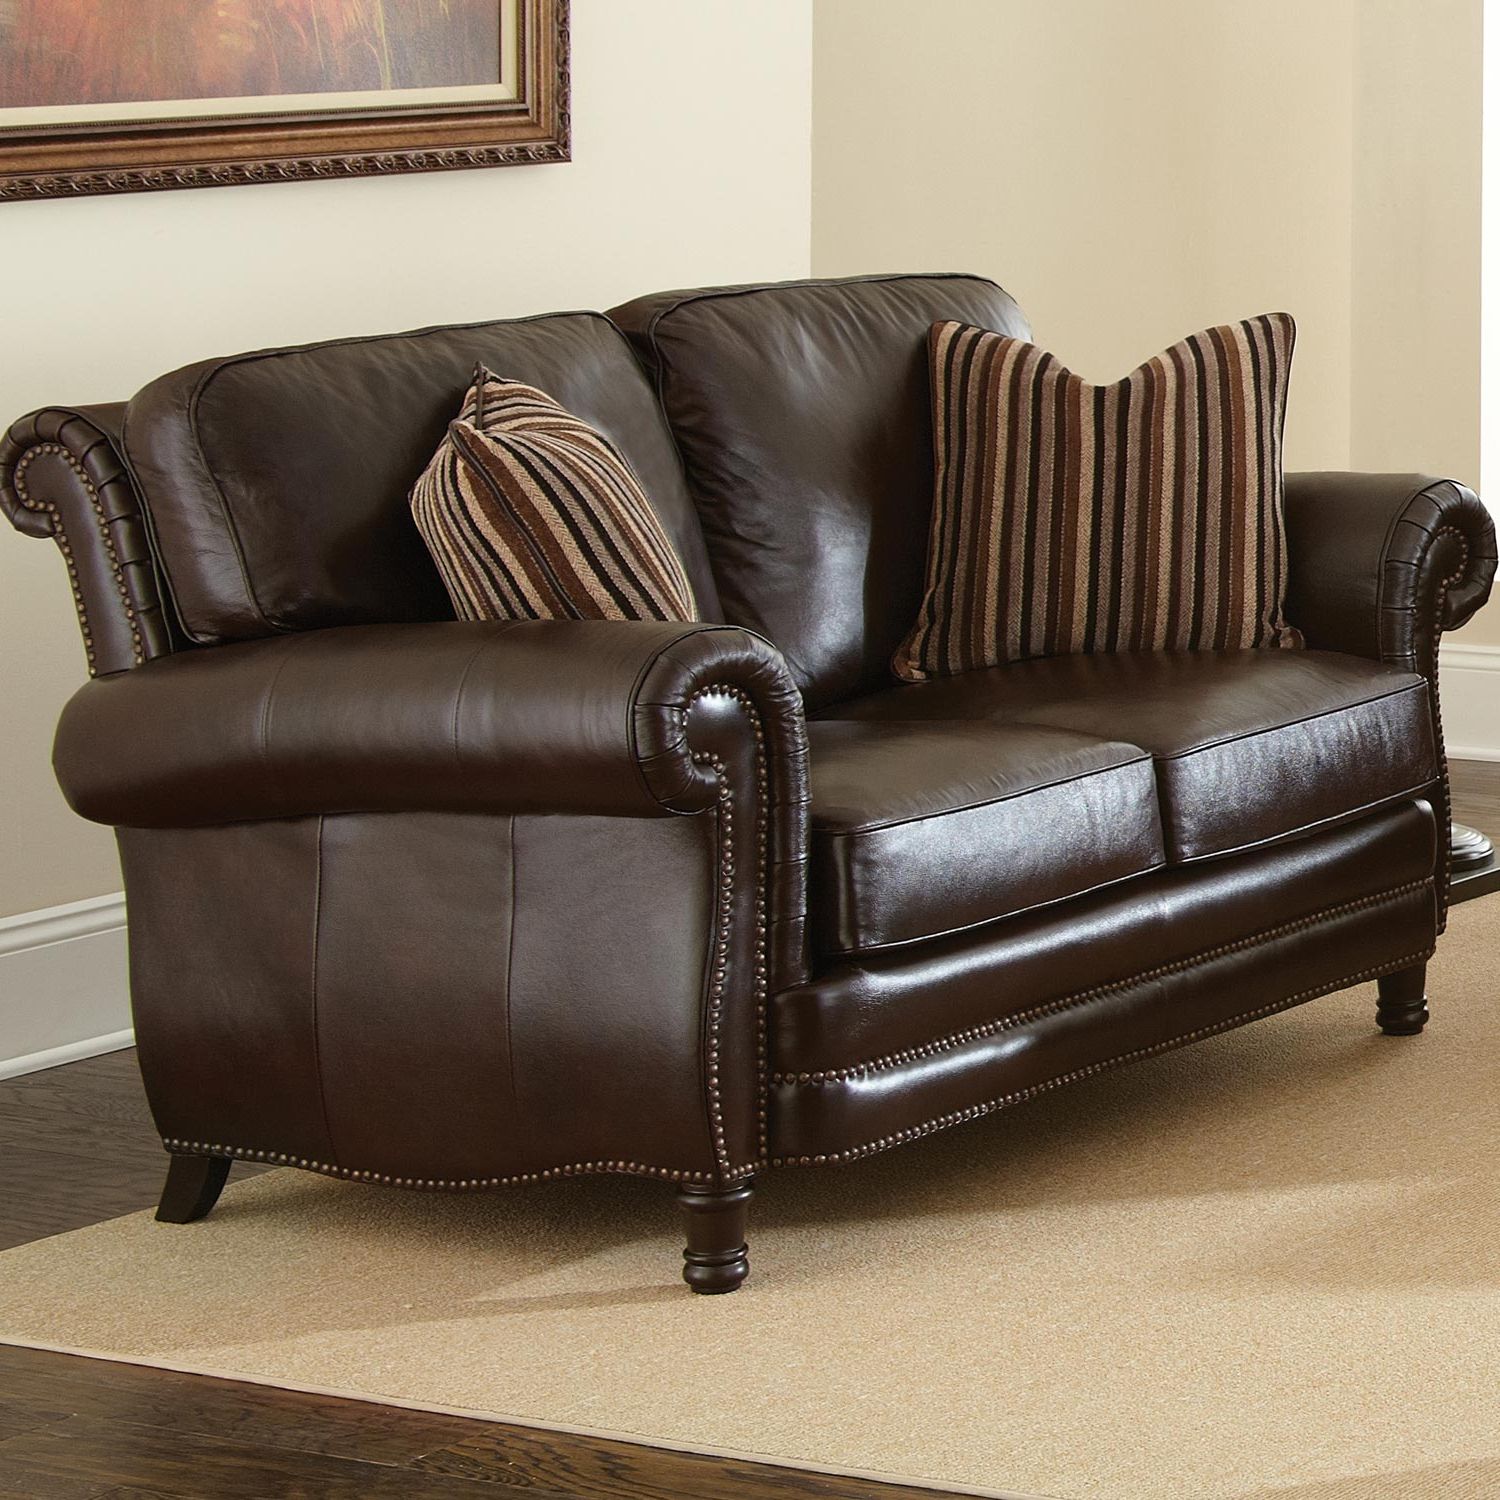 Featured Photo of The 20 Best Collection of Sofas in Chocolate Brown